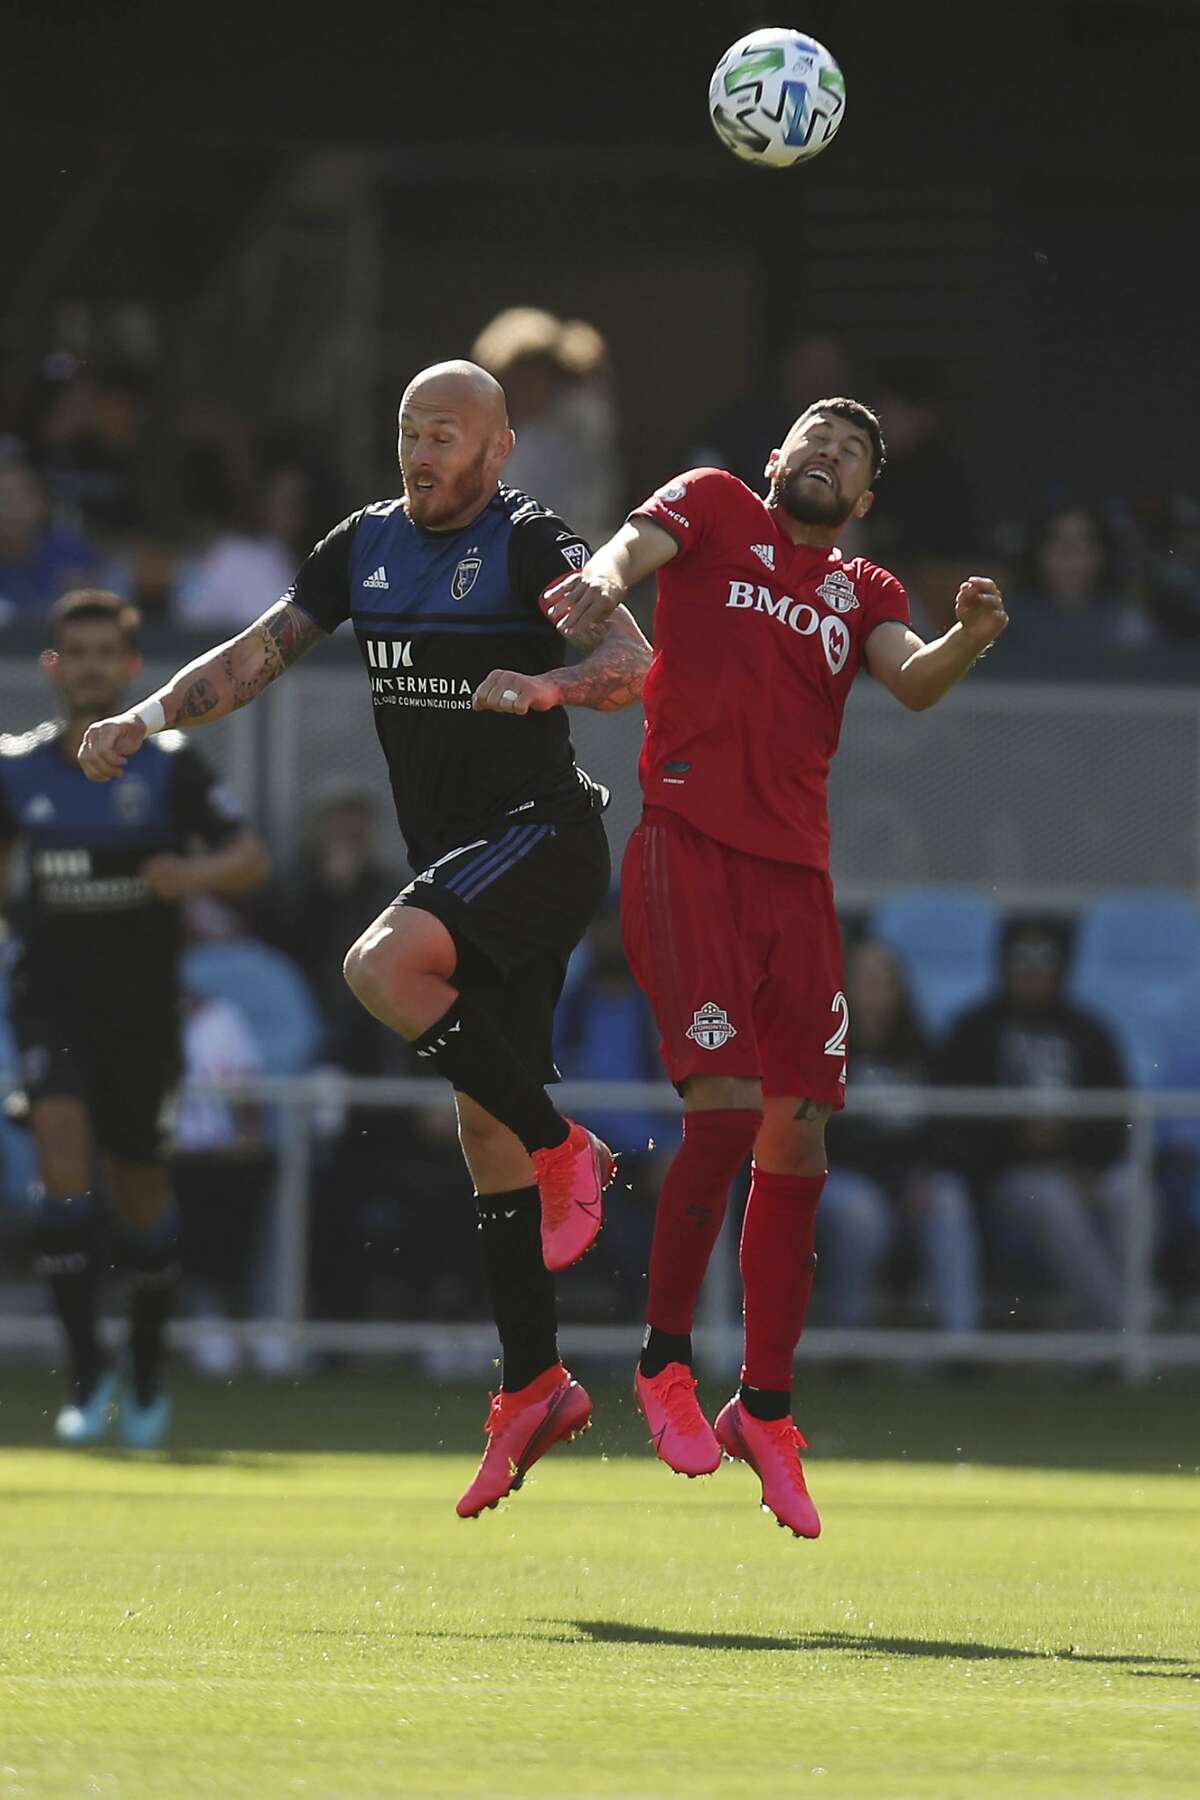 San Jose Earthquakes' Magnus Eriksson (7) battles for the ball with Toronto FC's Jonathan Osorio (23) during the first half of an MLS soccer game in San Jose, Calif., Saturday, Feb. 29, 2020. (AP Photo/Jed Jacobsohn)